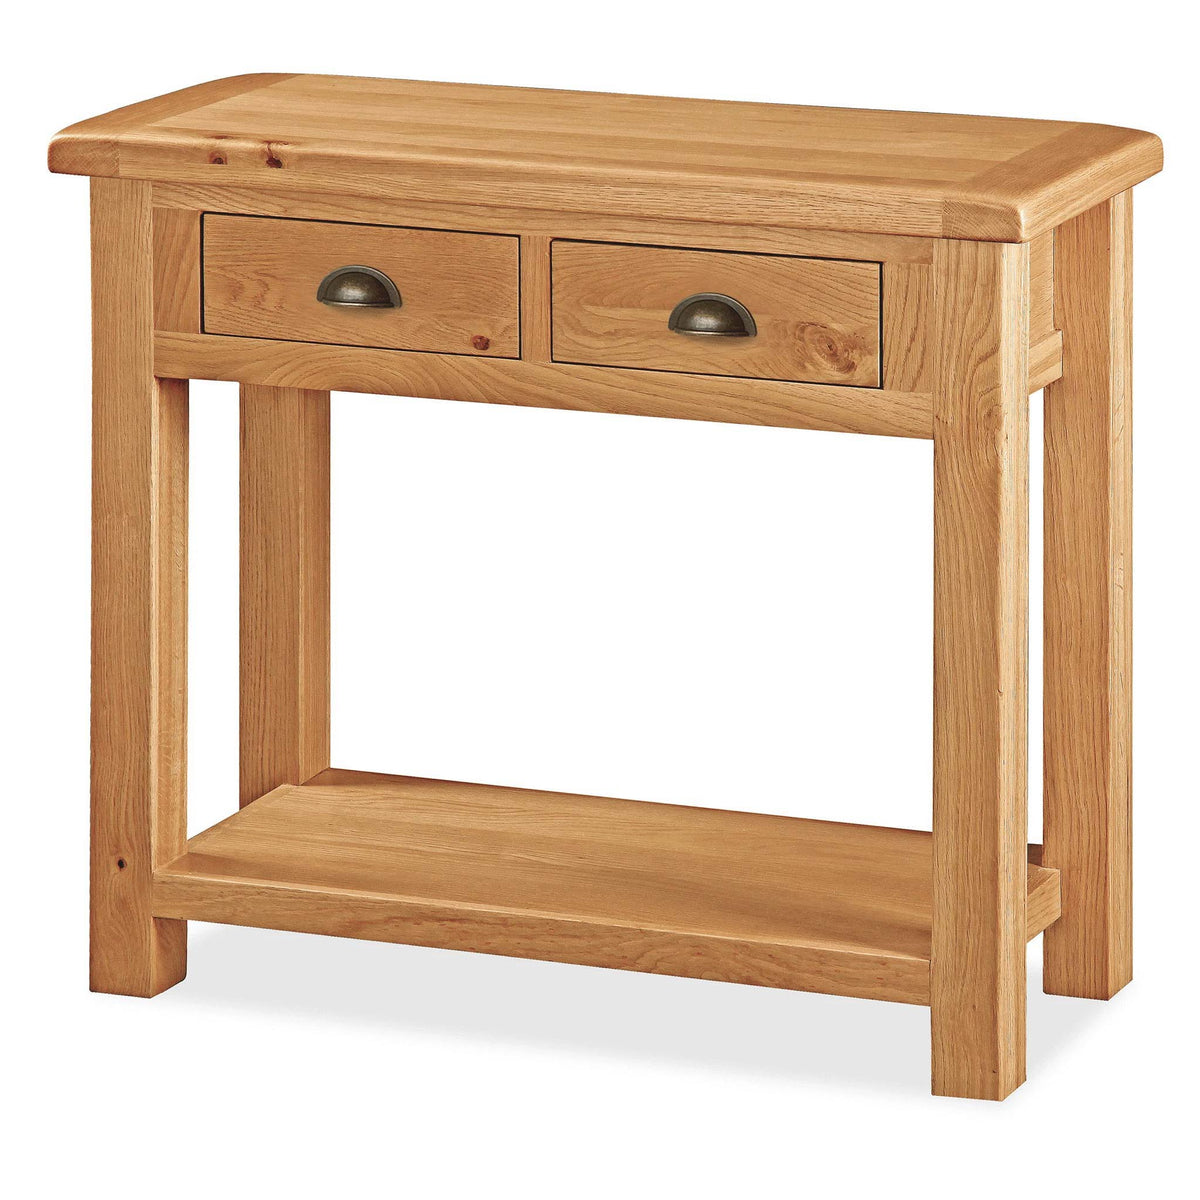 Sidmouth Oak Console Table with Two Drawers and Lower Shelf